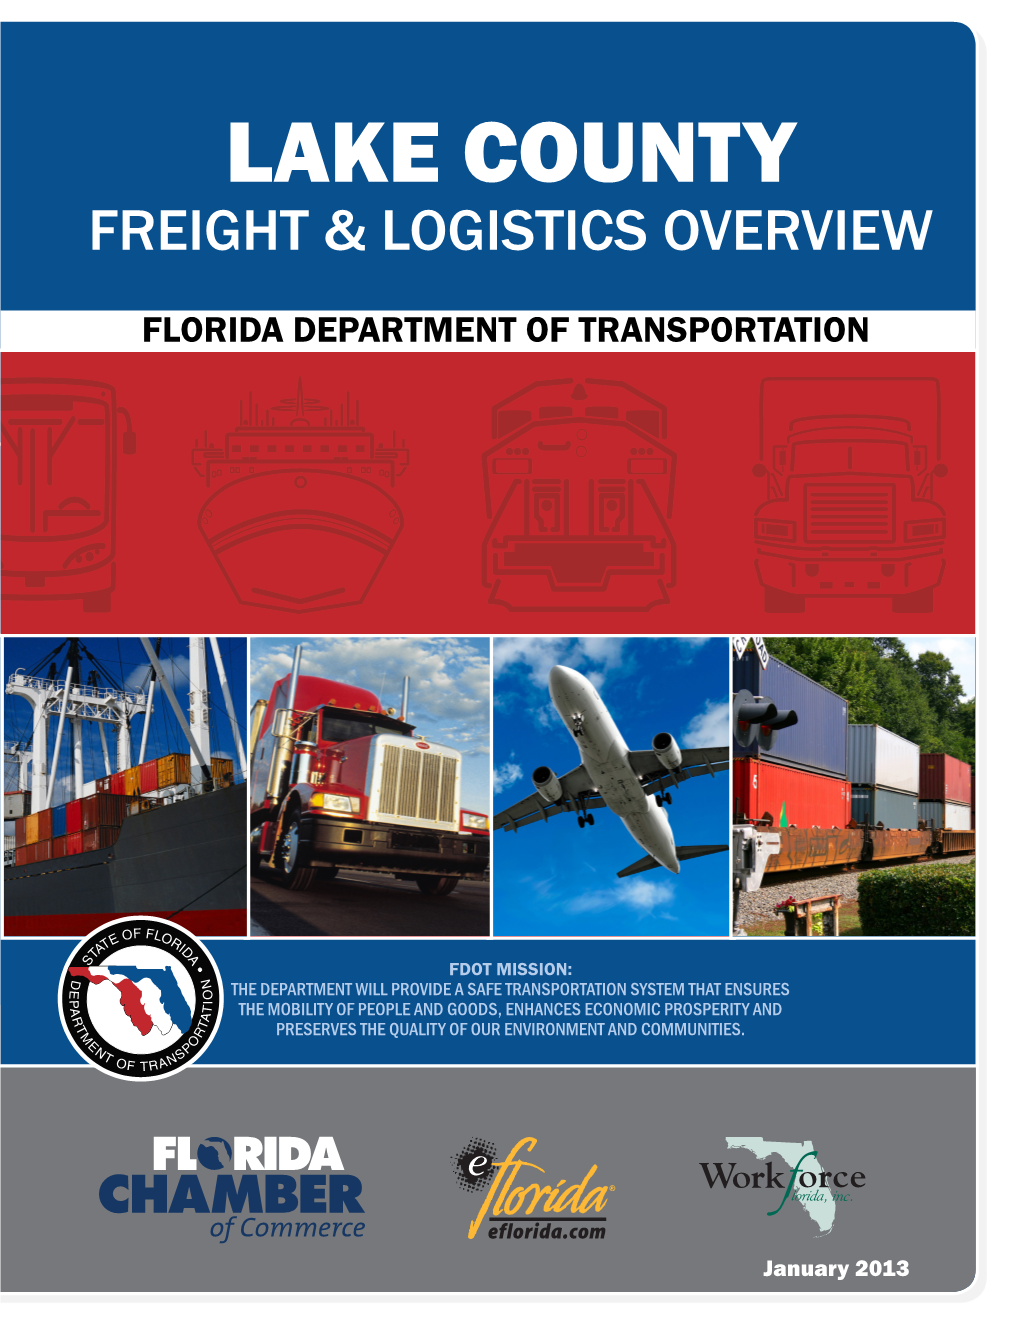 Lake County Freight & Logistics Overview